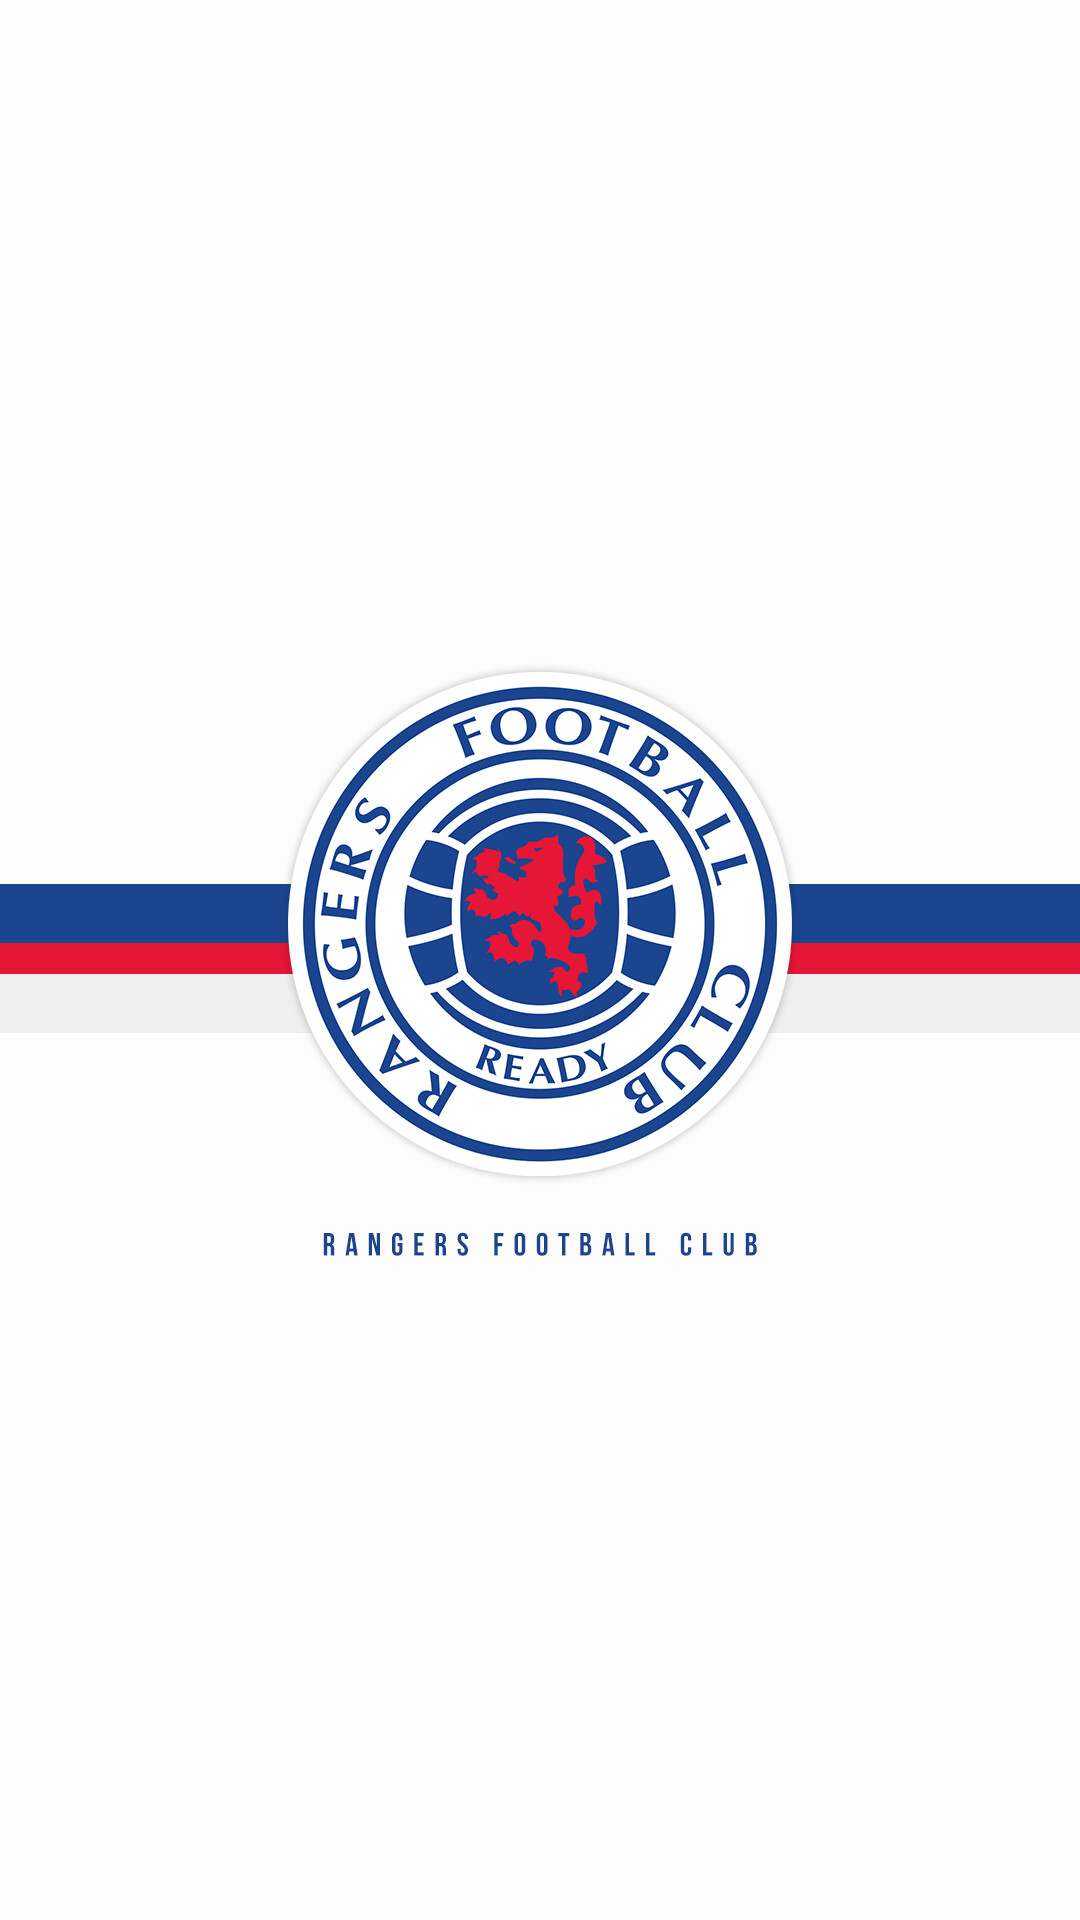 Rangers F.C.: The second-most successful club in world football in terms of trophies won. 1080x1920 Full HD Wallpaper.